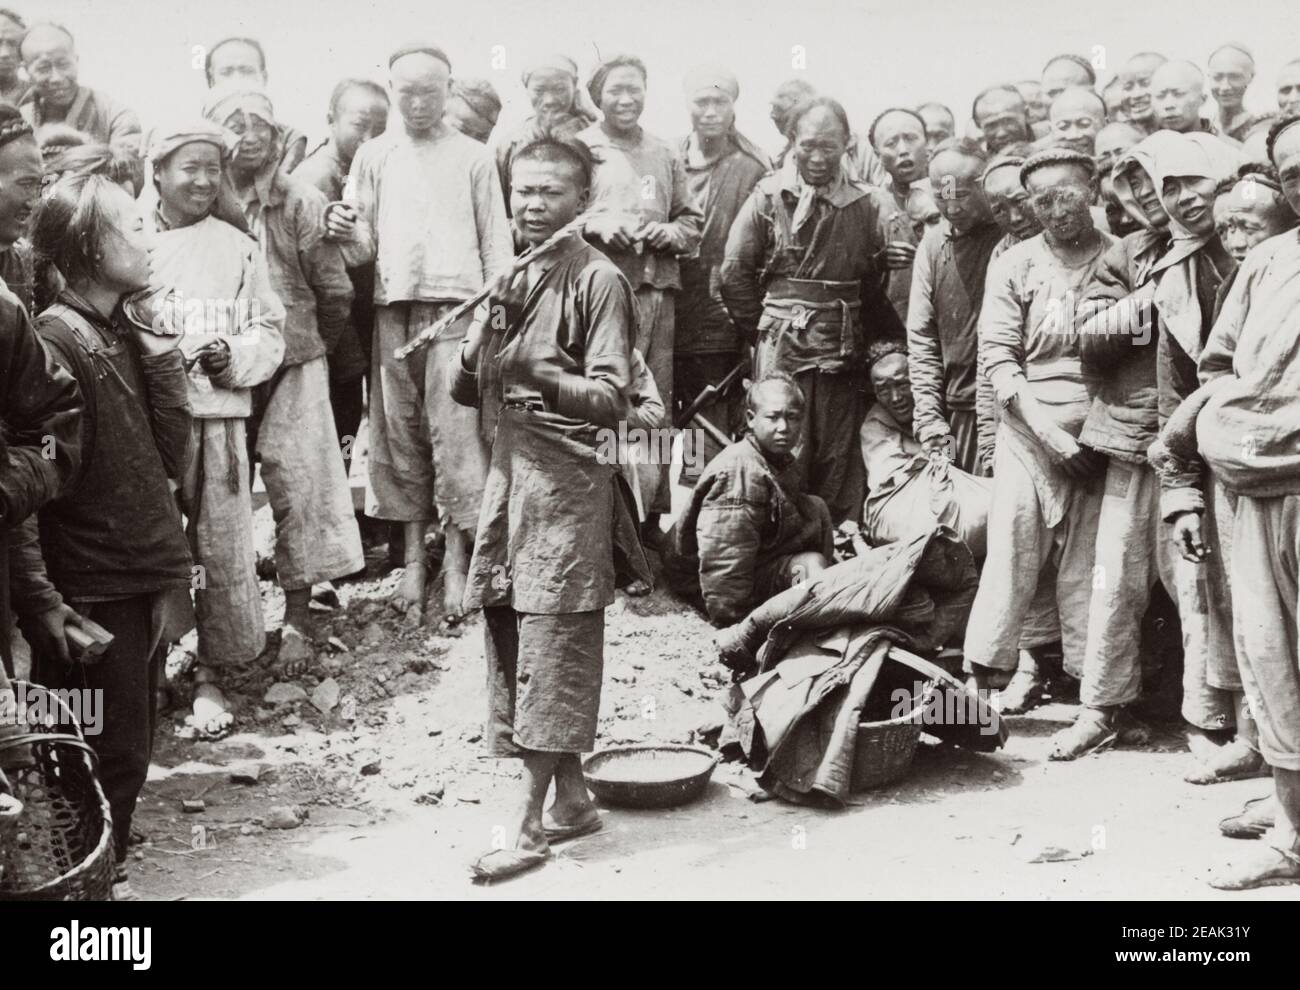 Early 20th century photograph: Daily life, Chinese peasant farm workers ...